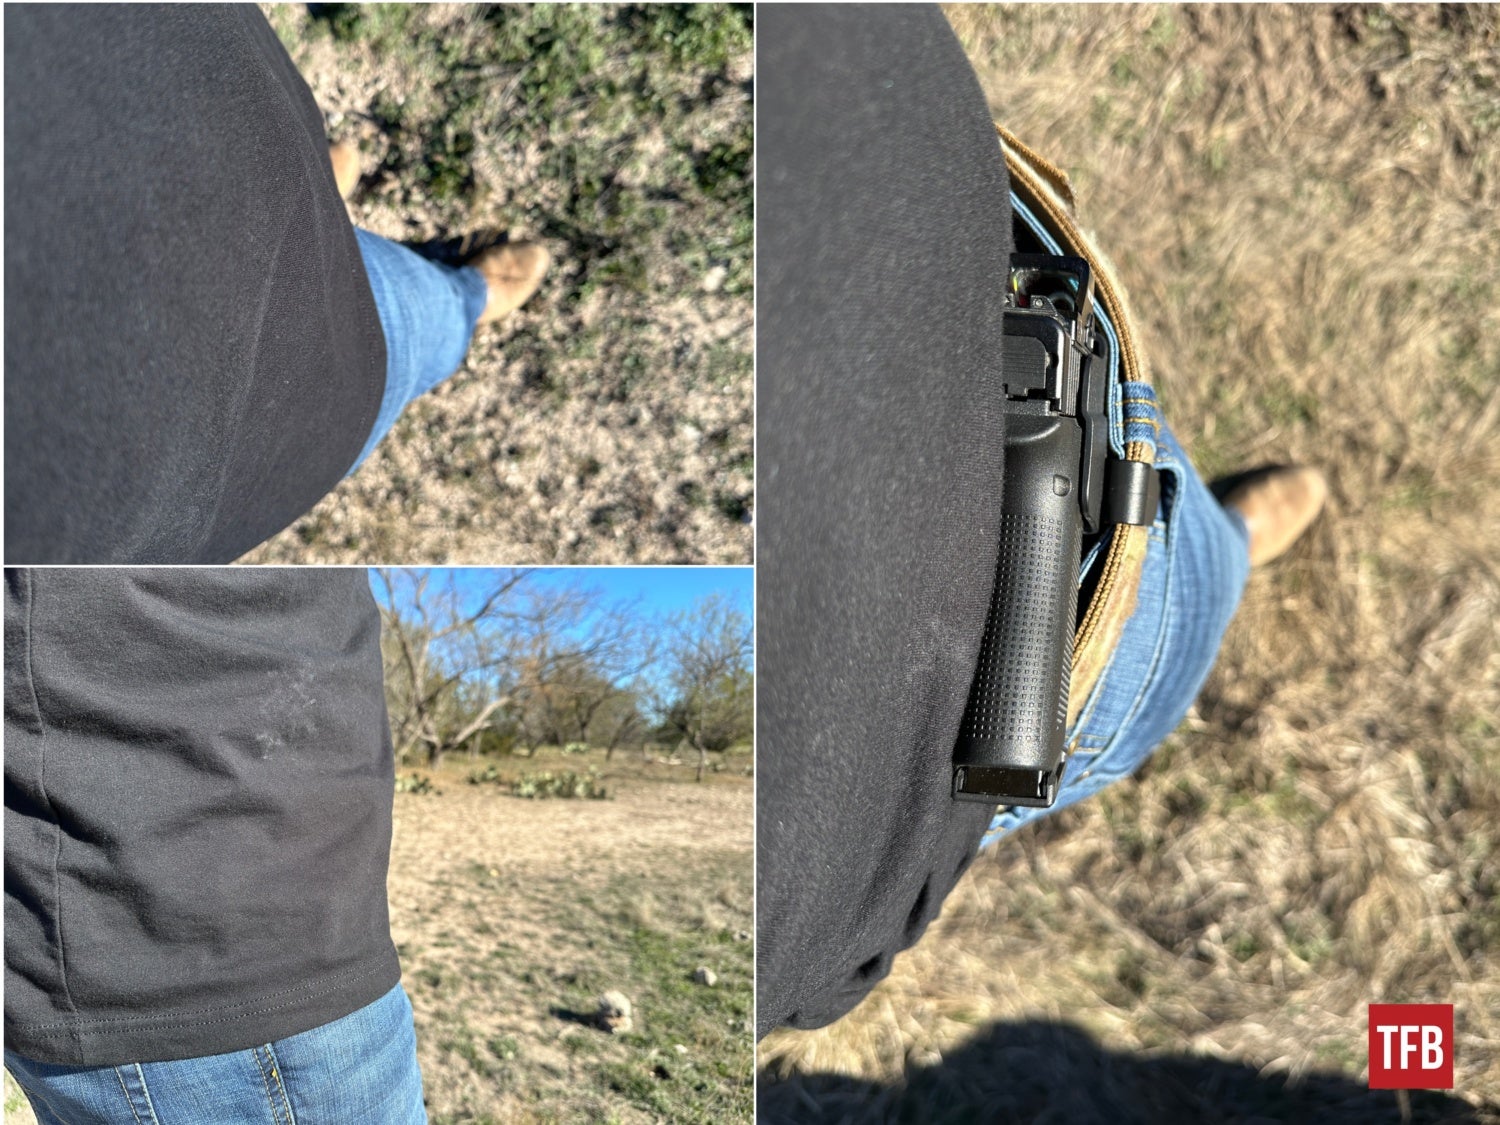 The 48 conceals beautifully, with minimal printing issues in a quality holster that's fit for purpose.